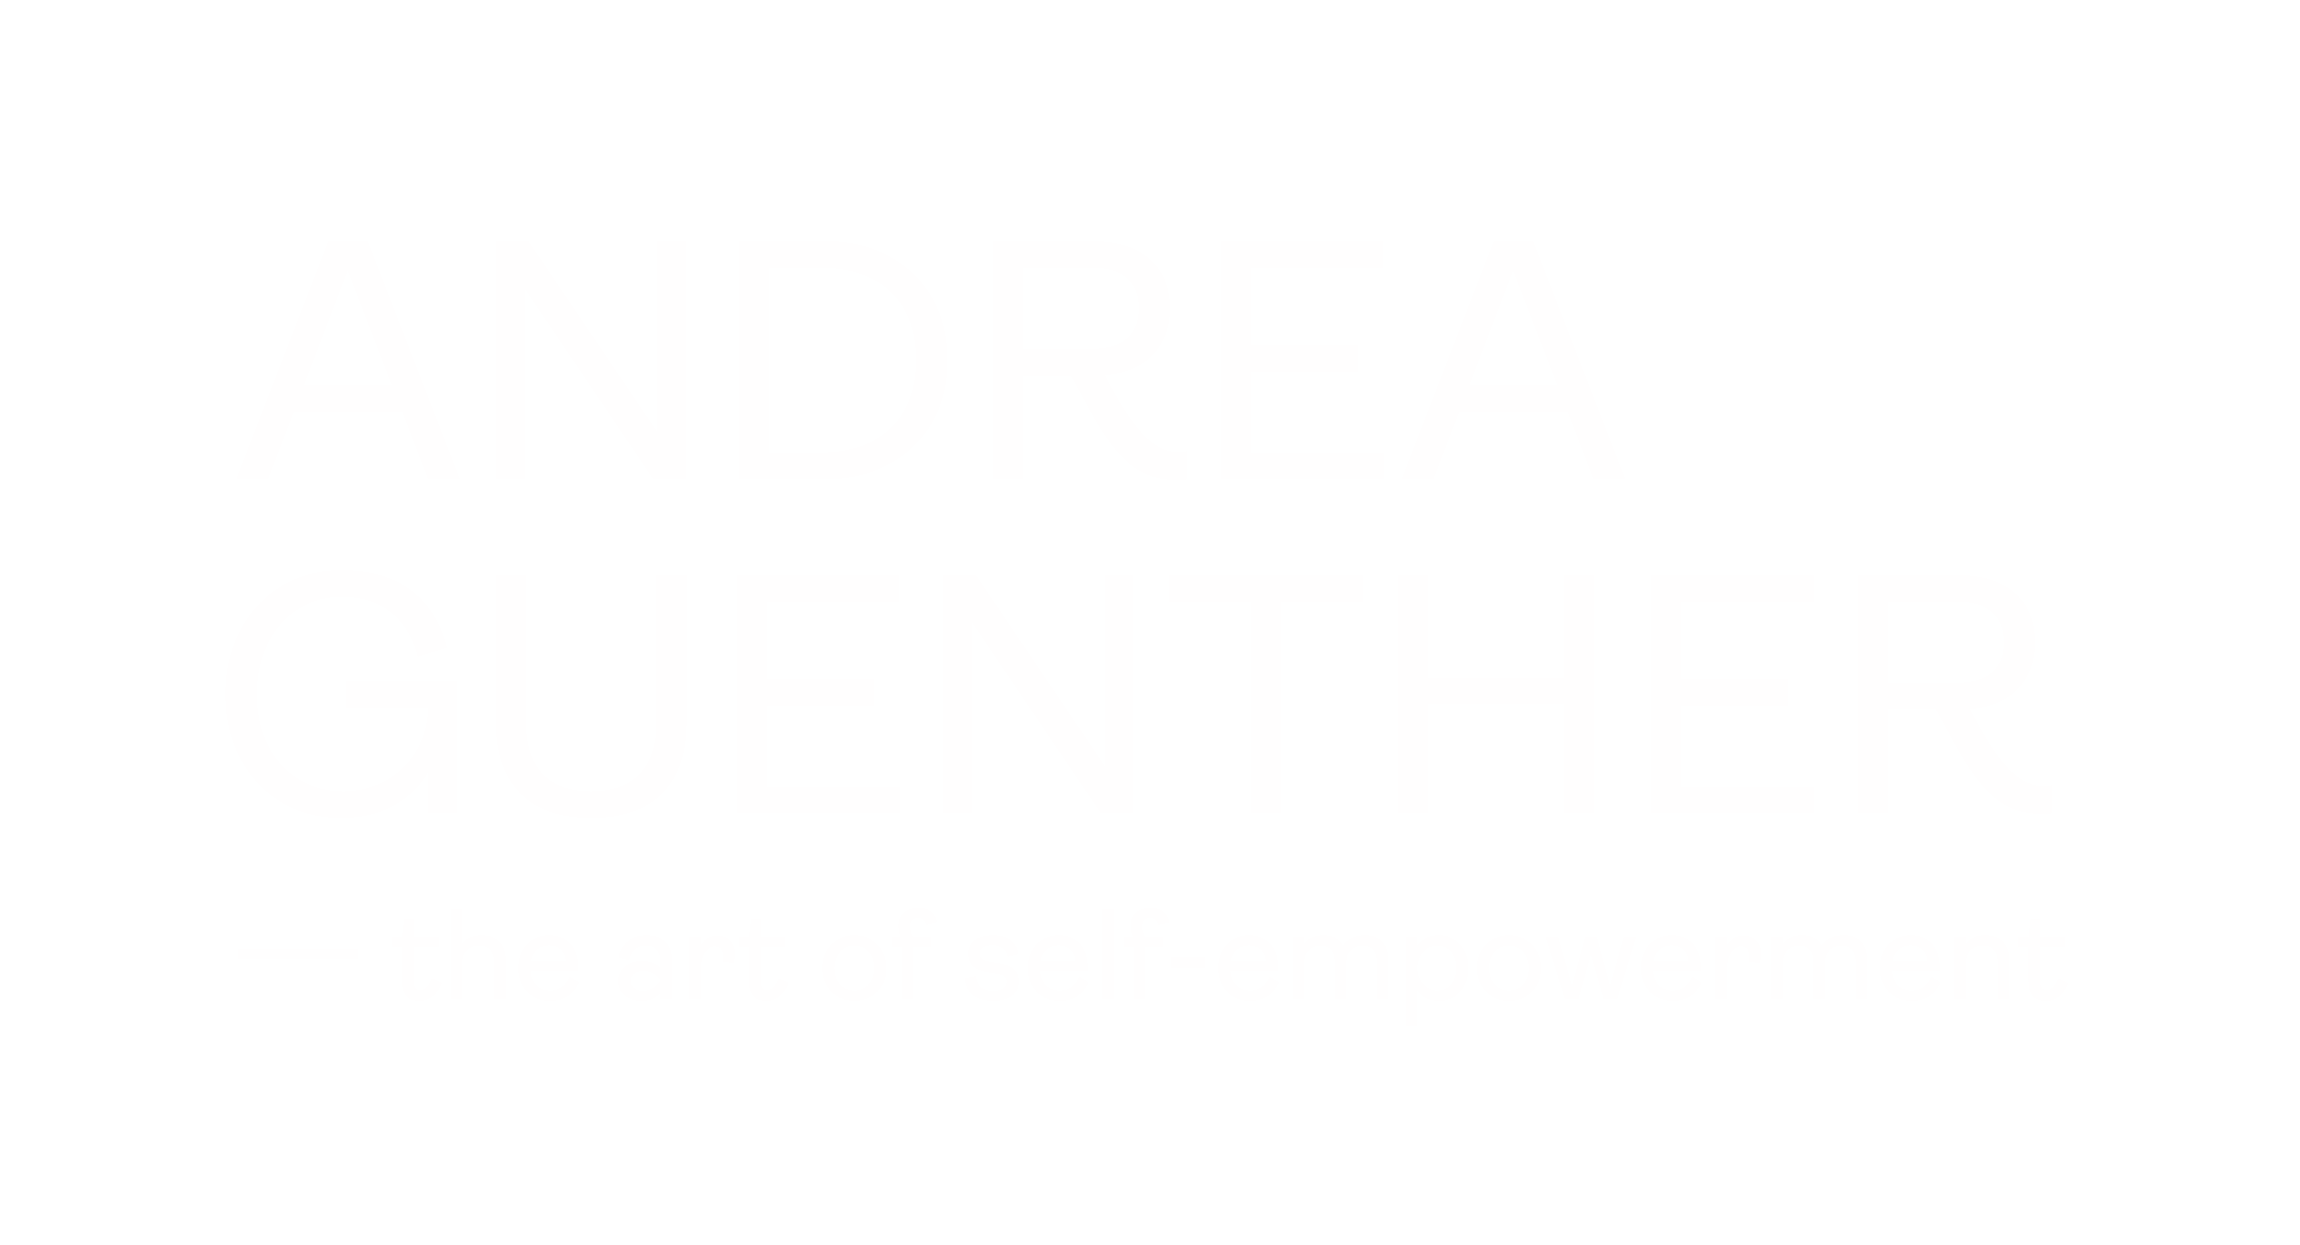 Andrea Guenther | the art of self-empowerment